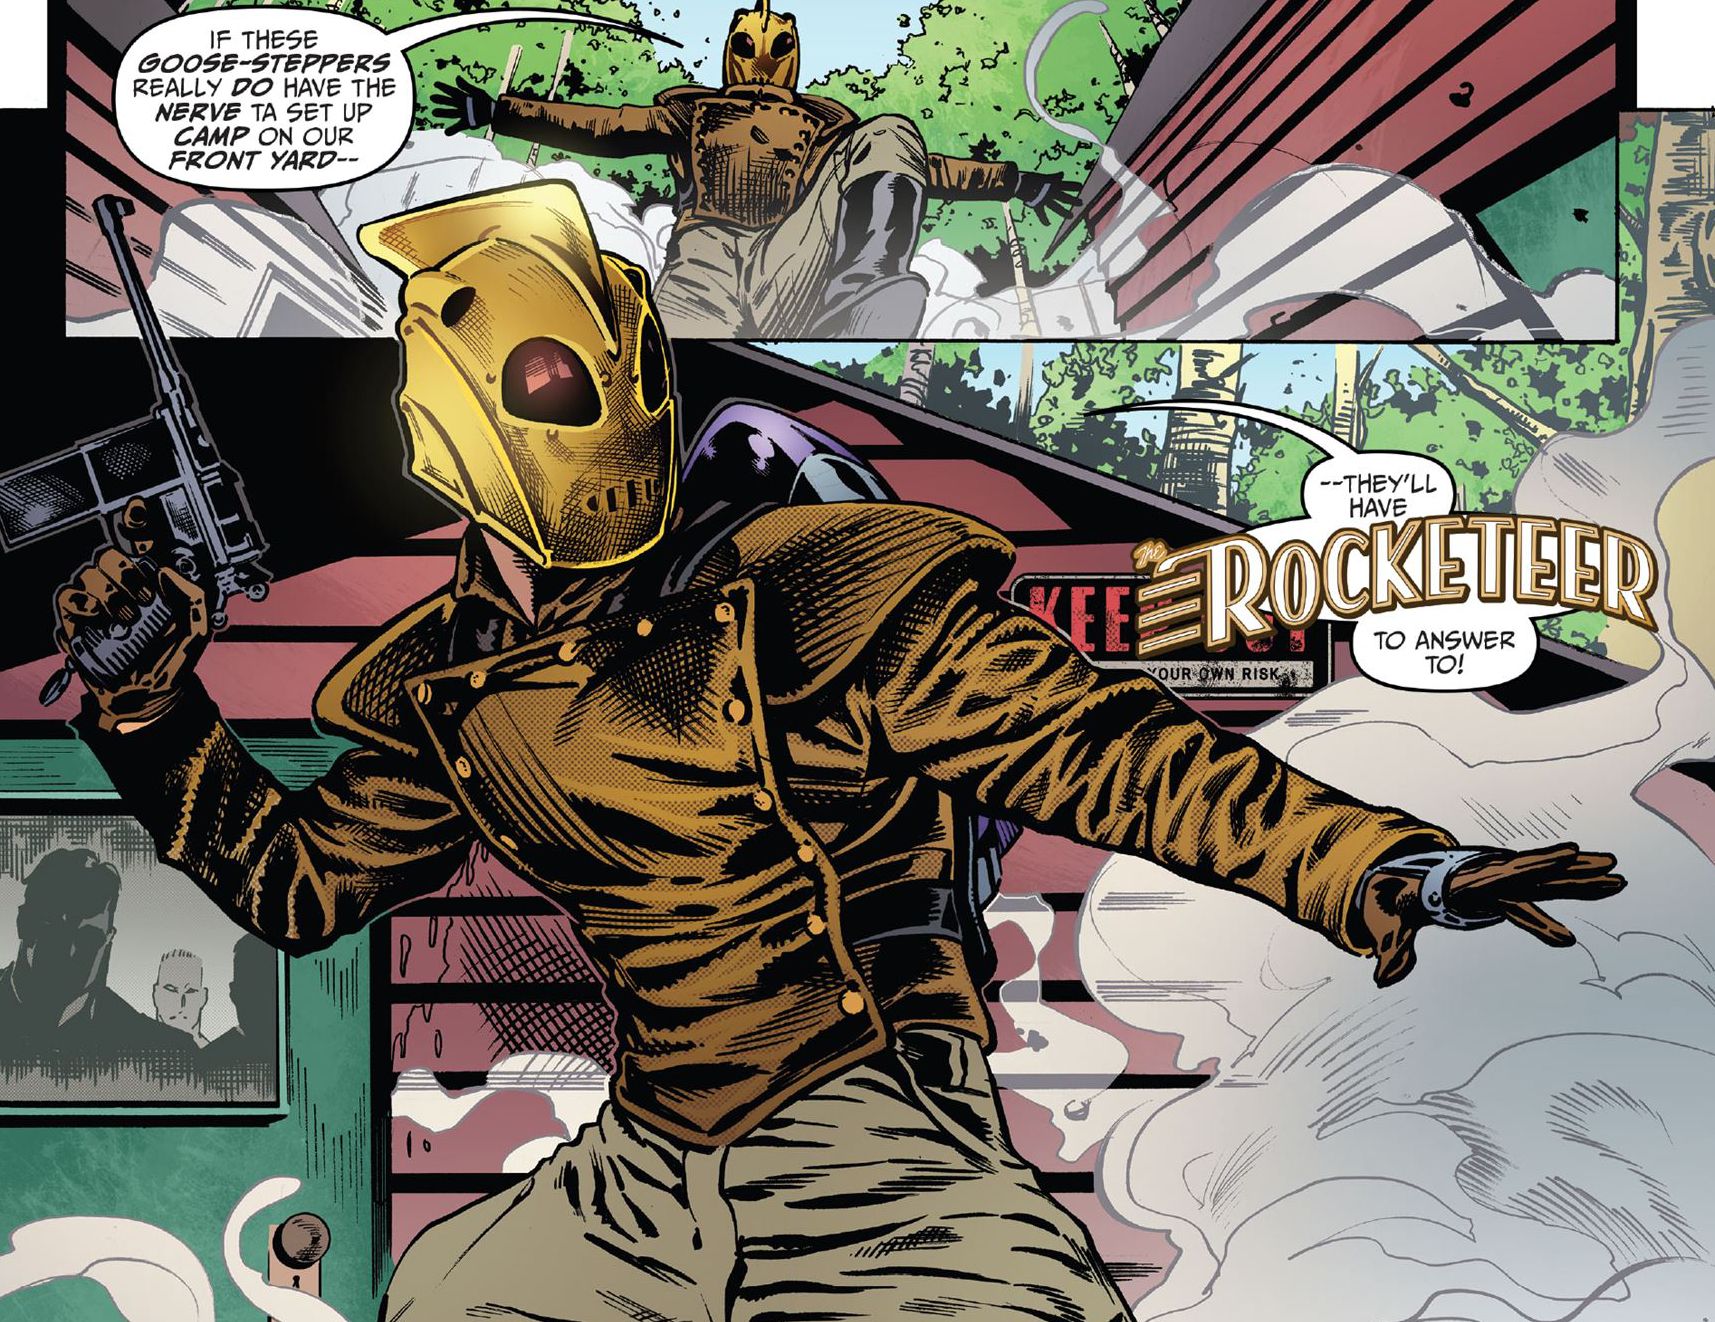 The Rocketeer arrives at a nazi camp